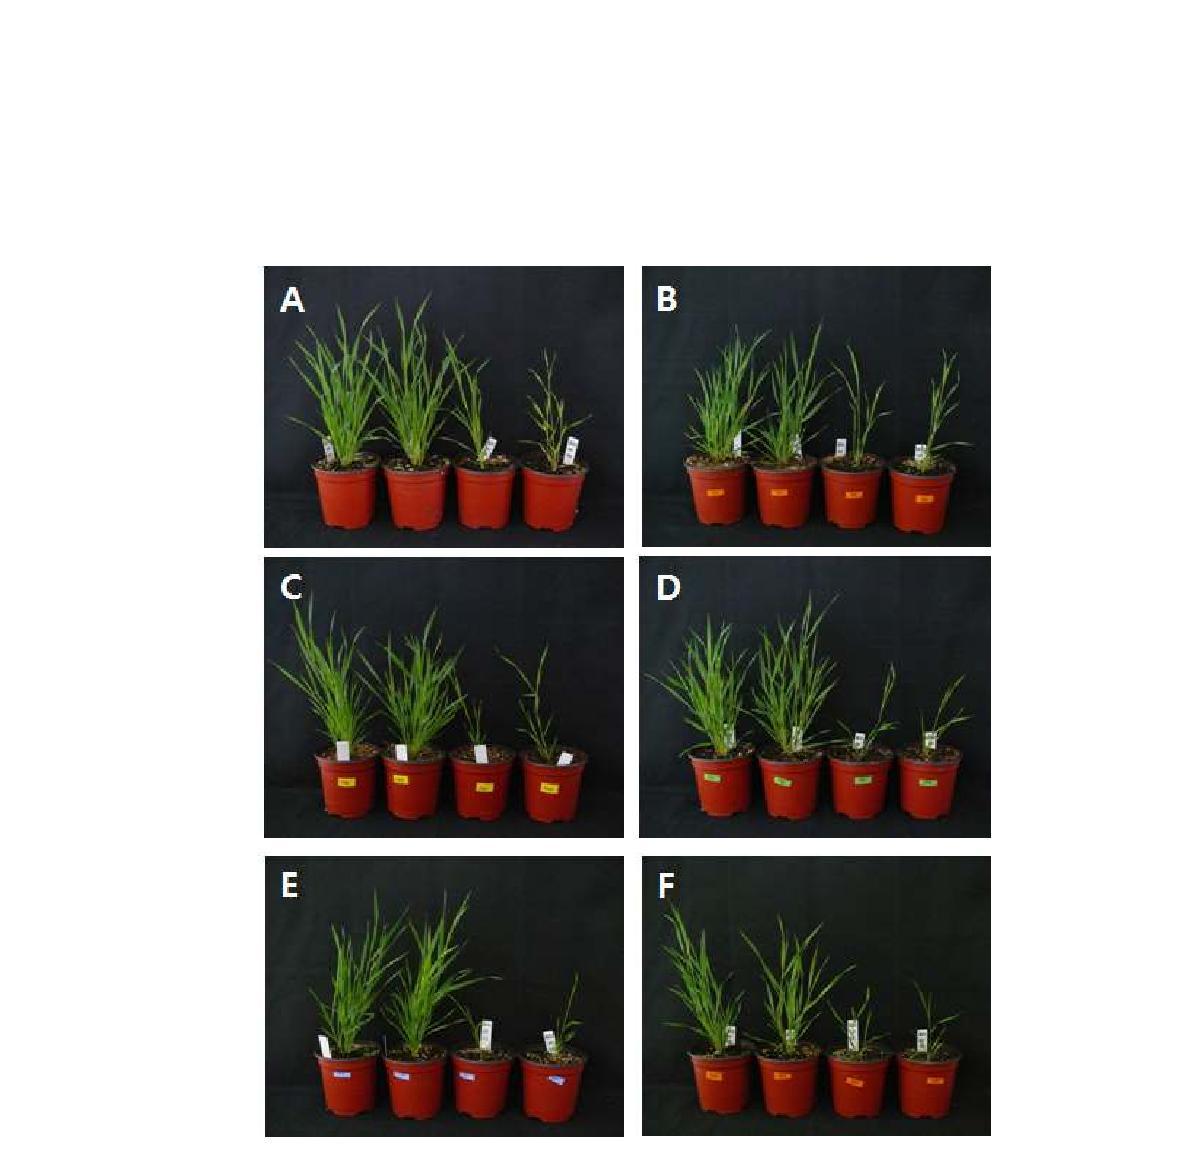 Plant growth in response to various doses of gamma-radiation. A: wild-types, B: 50 Gy, C: 100 Gy, D: 150 Gy, E: 200 Gy, F: 250 Gy.